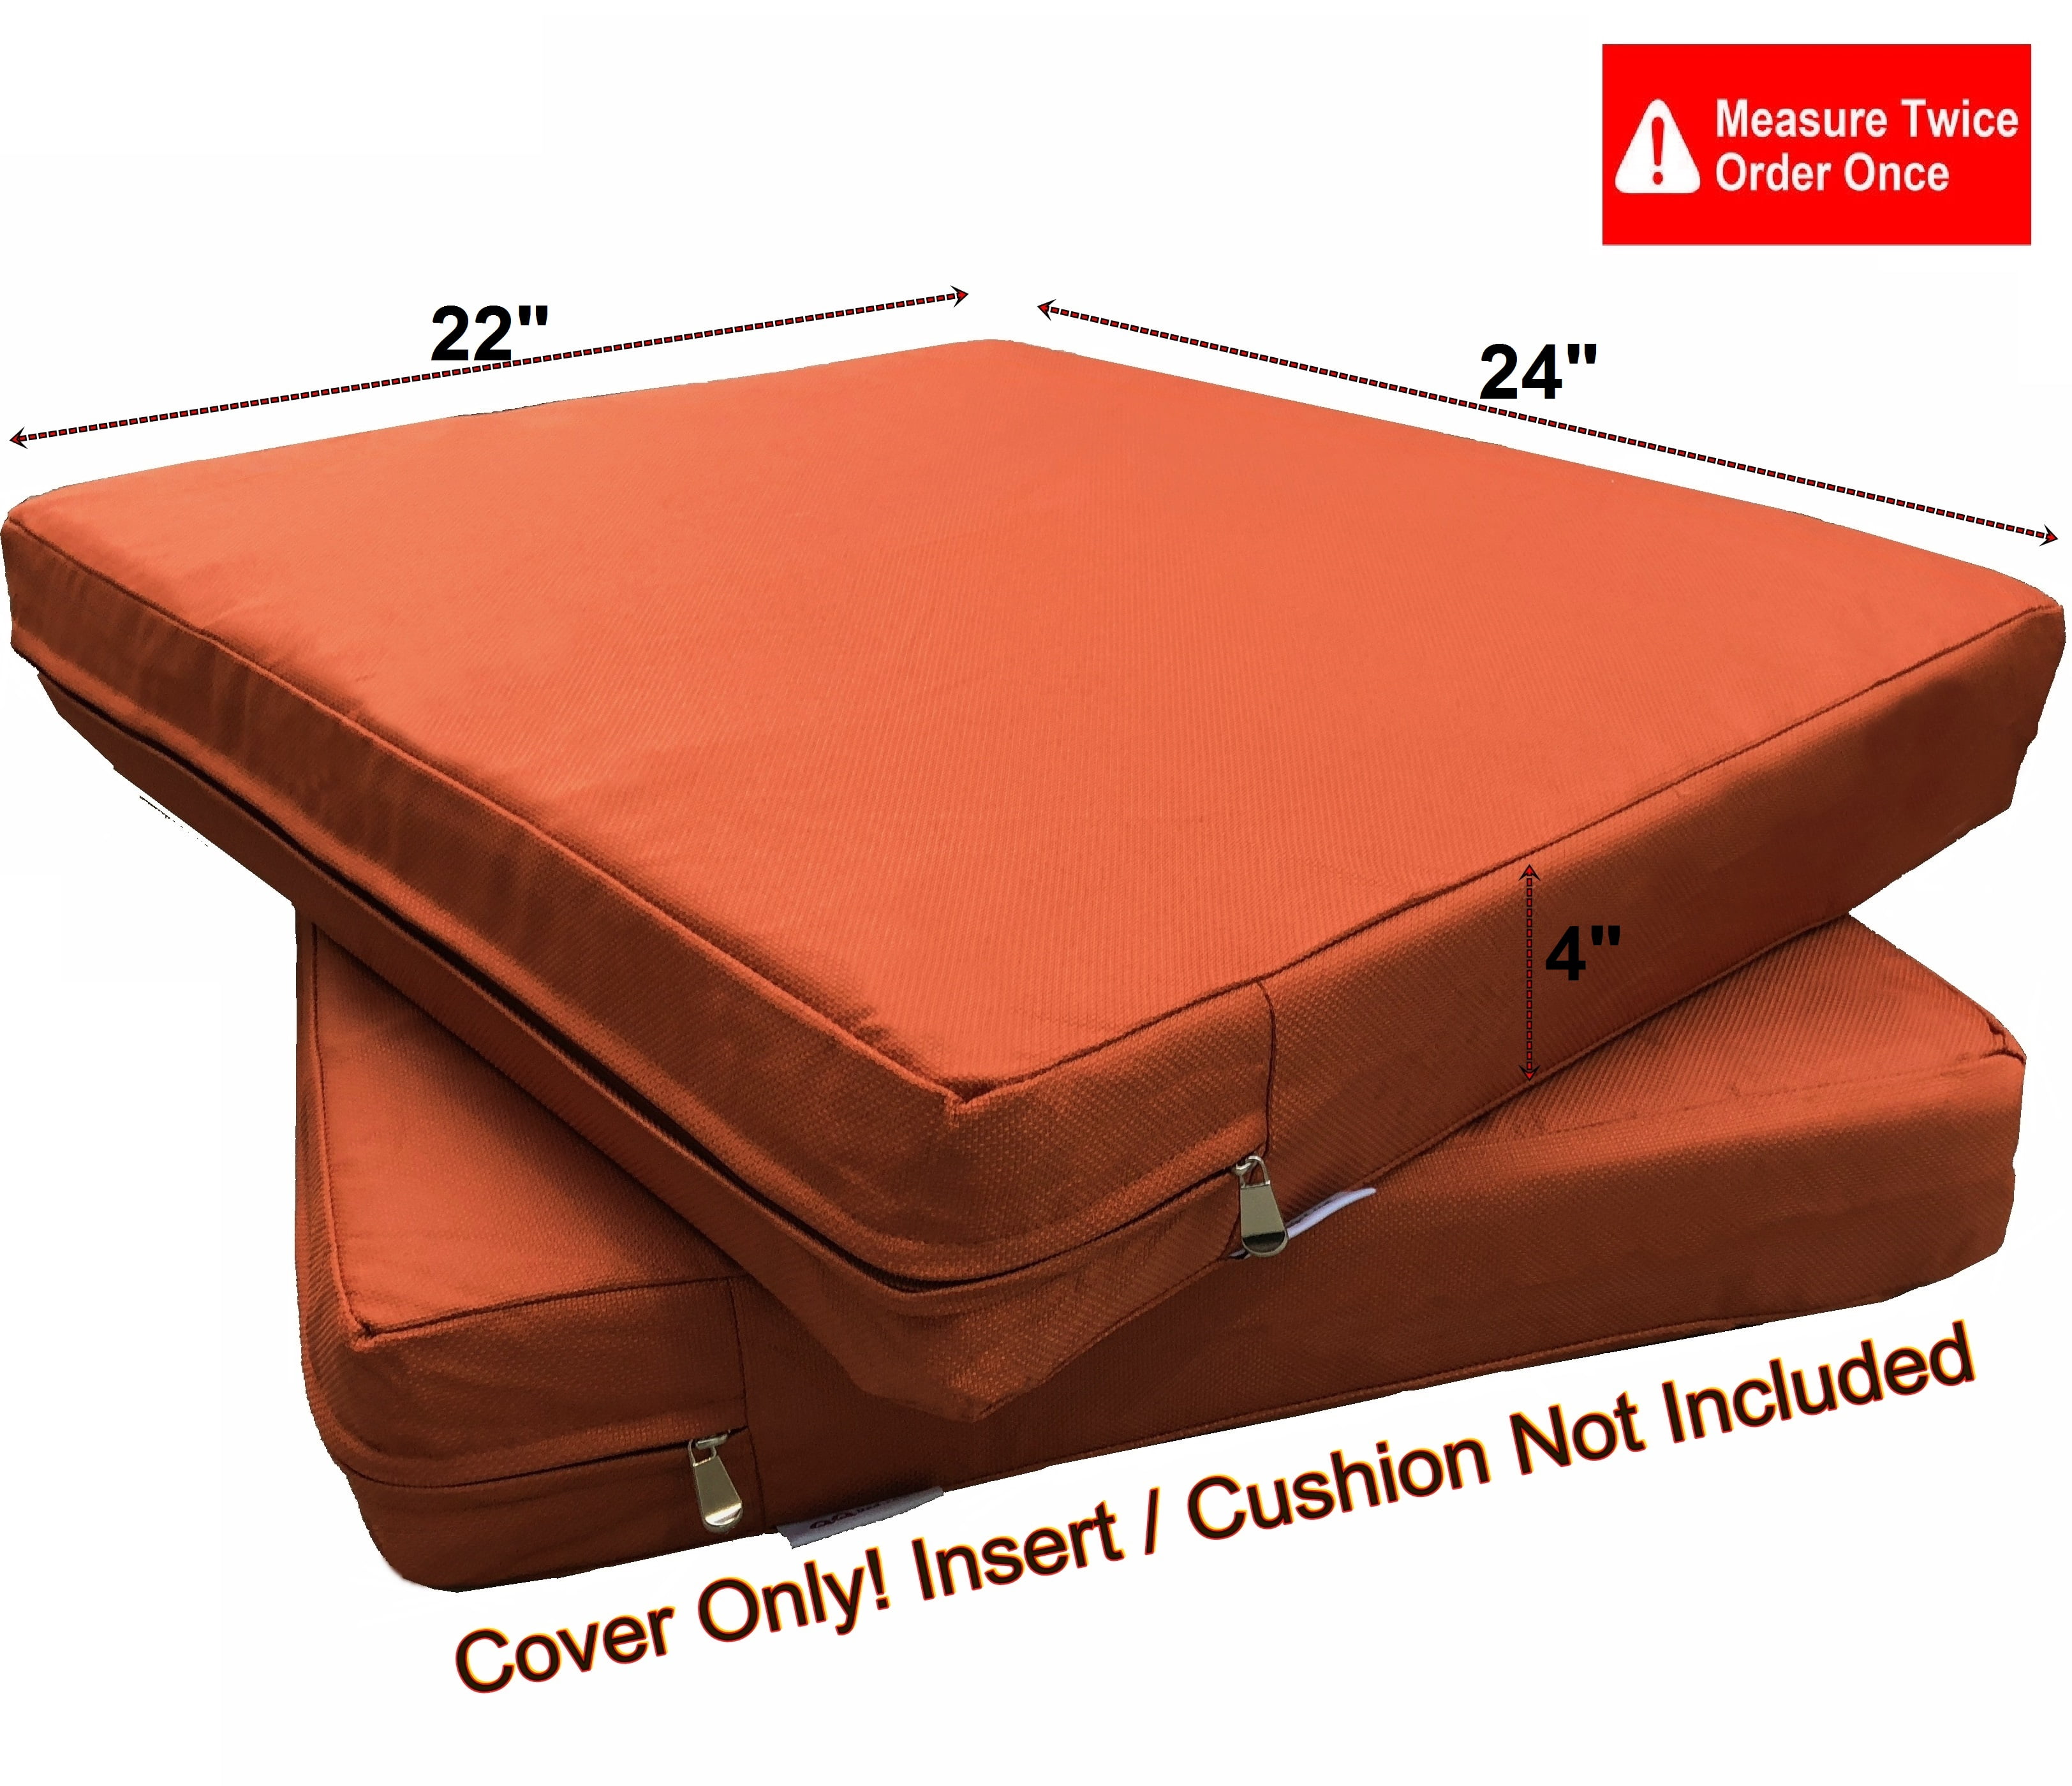 Waterproof Outdoor Seat Chair Patio Cushion Cover Duvet Case 18X20X4 Tango Color 